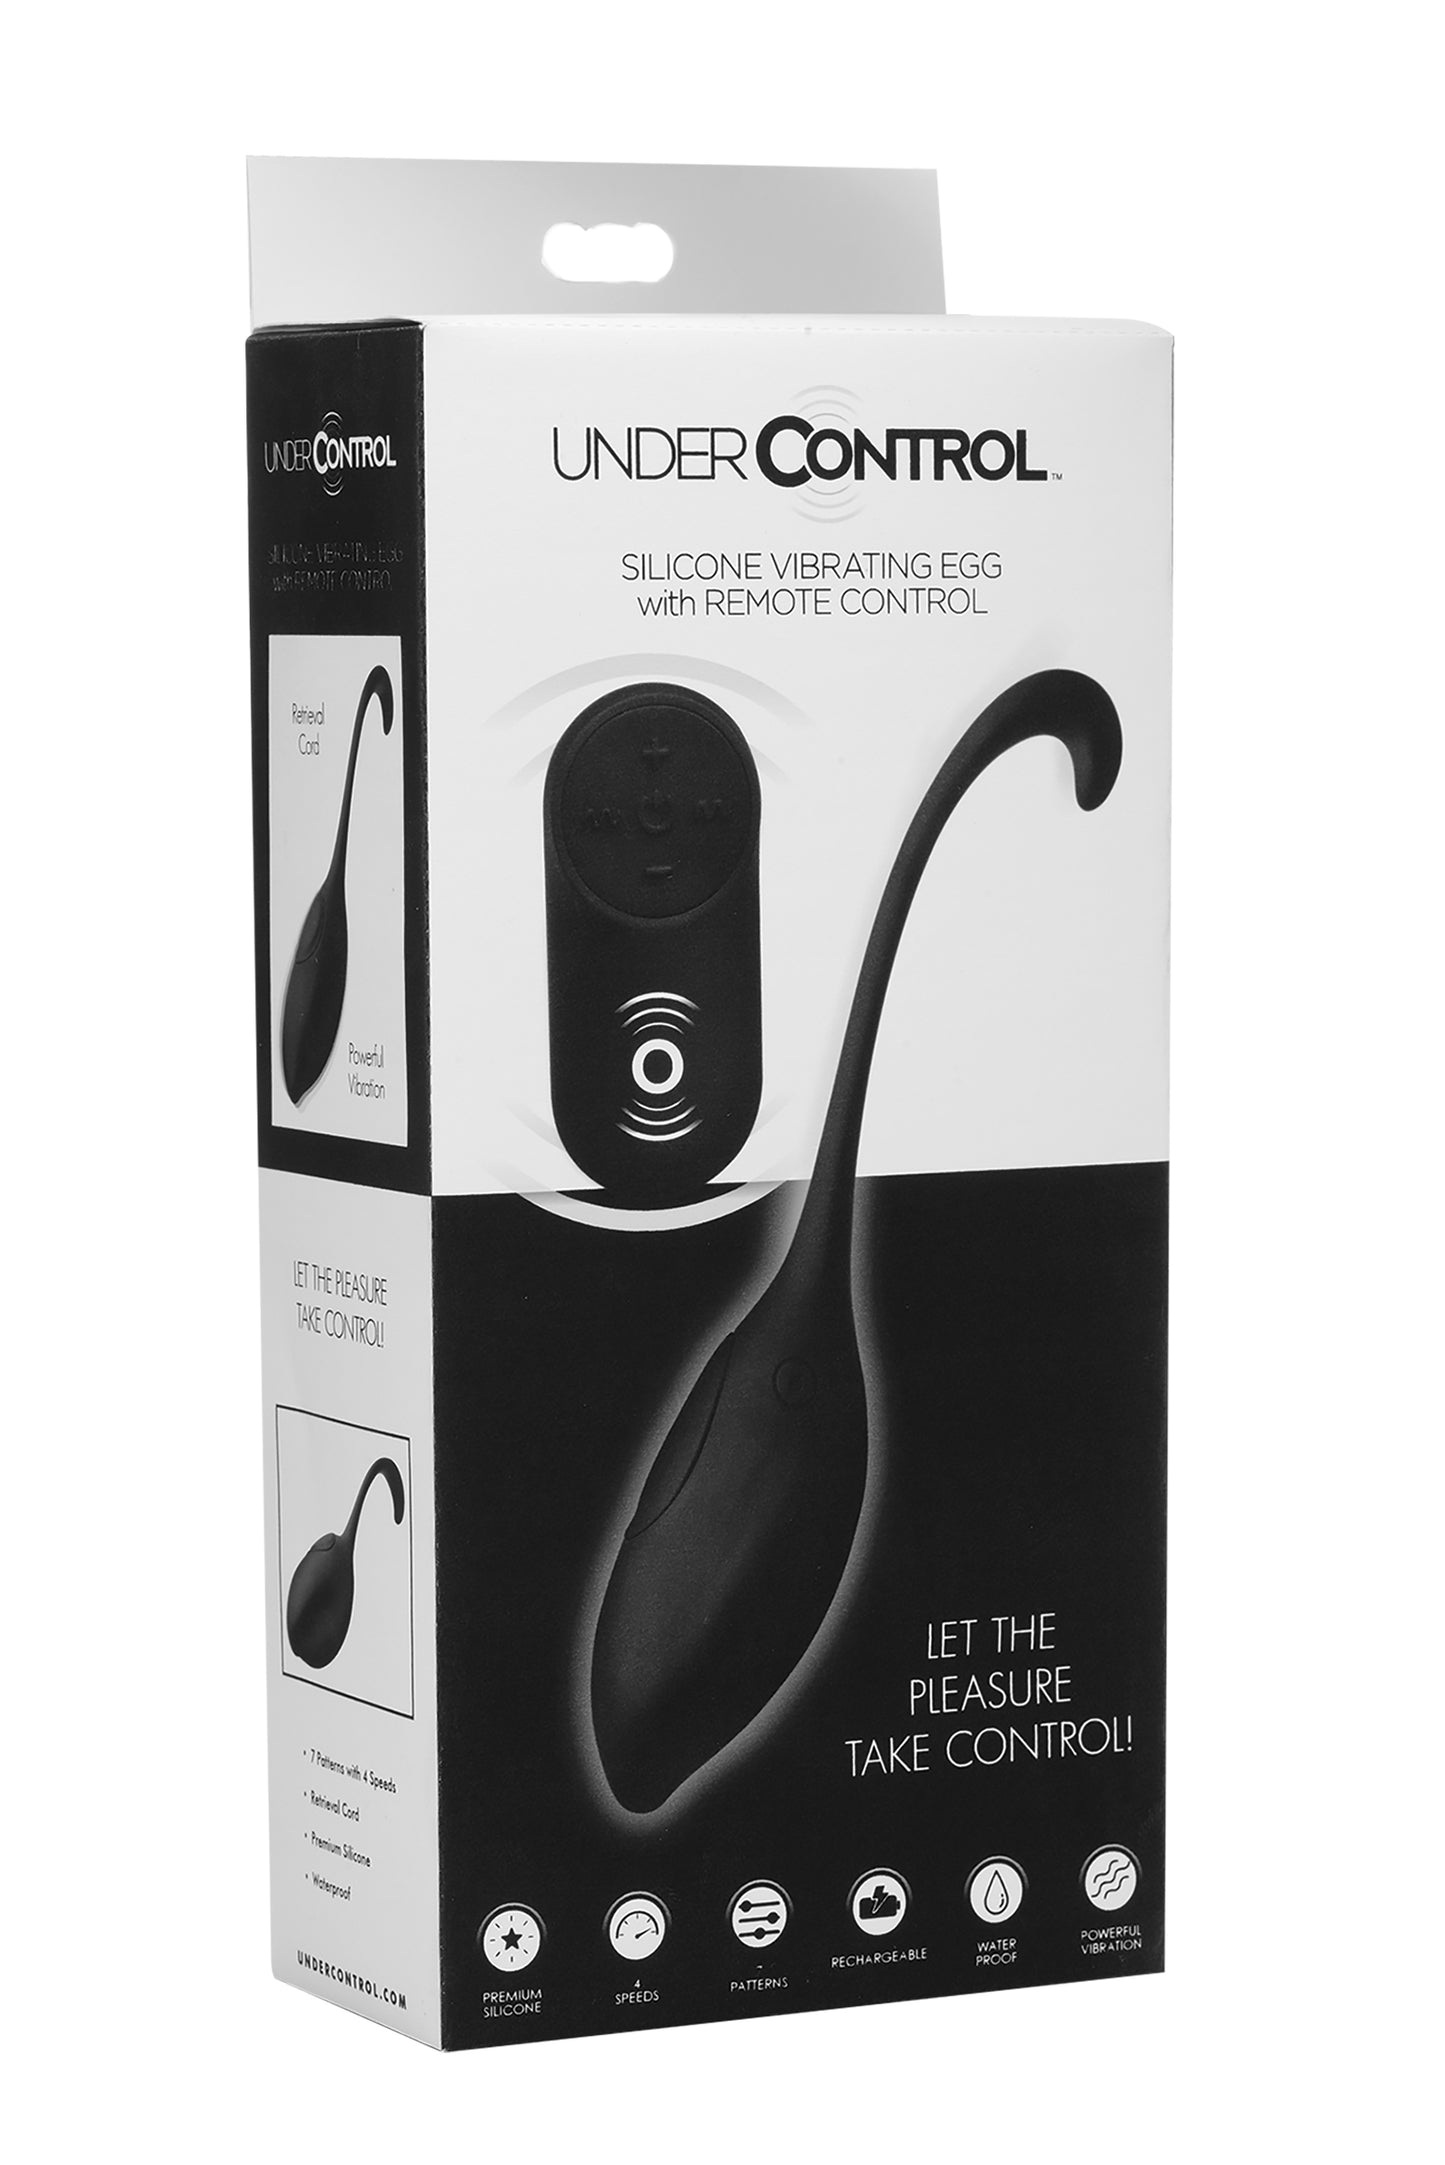 Silicone Vibrating Egg with Remote Control - UABDSM